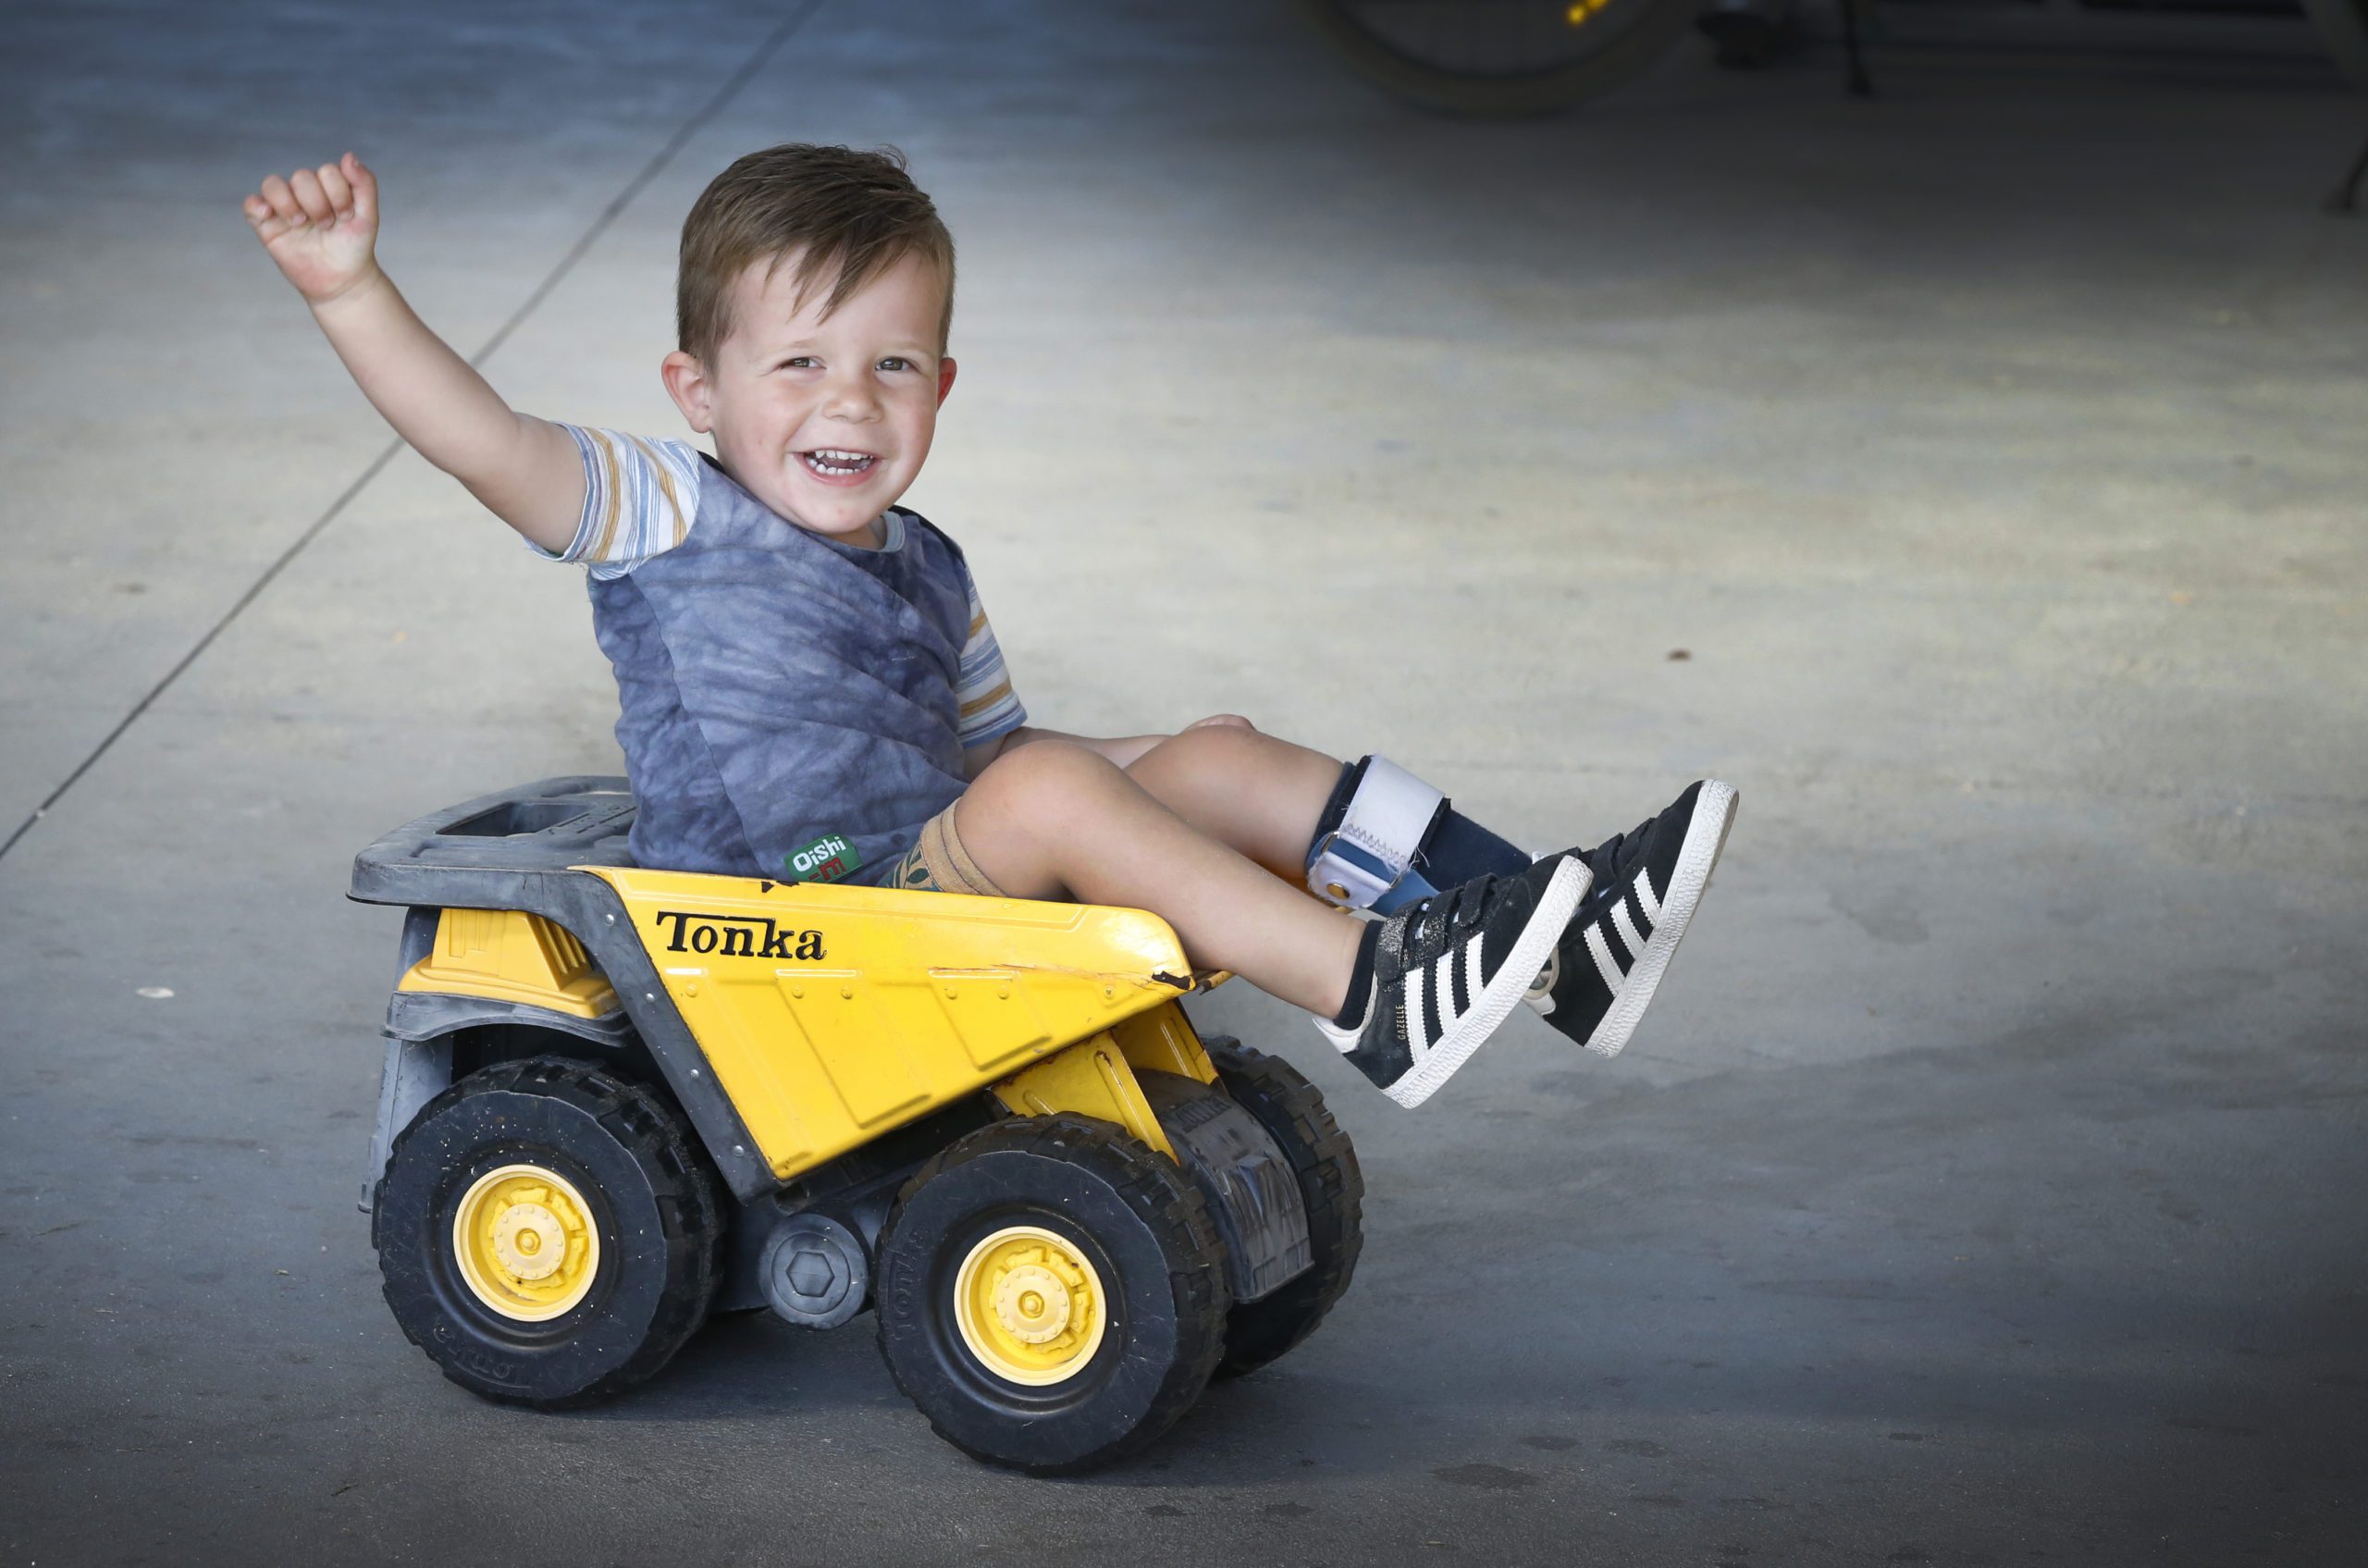 Malu sitting in a toy truck, smiling with his arm raised up in the air